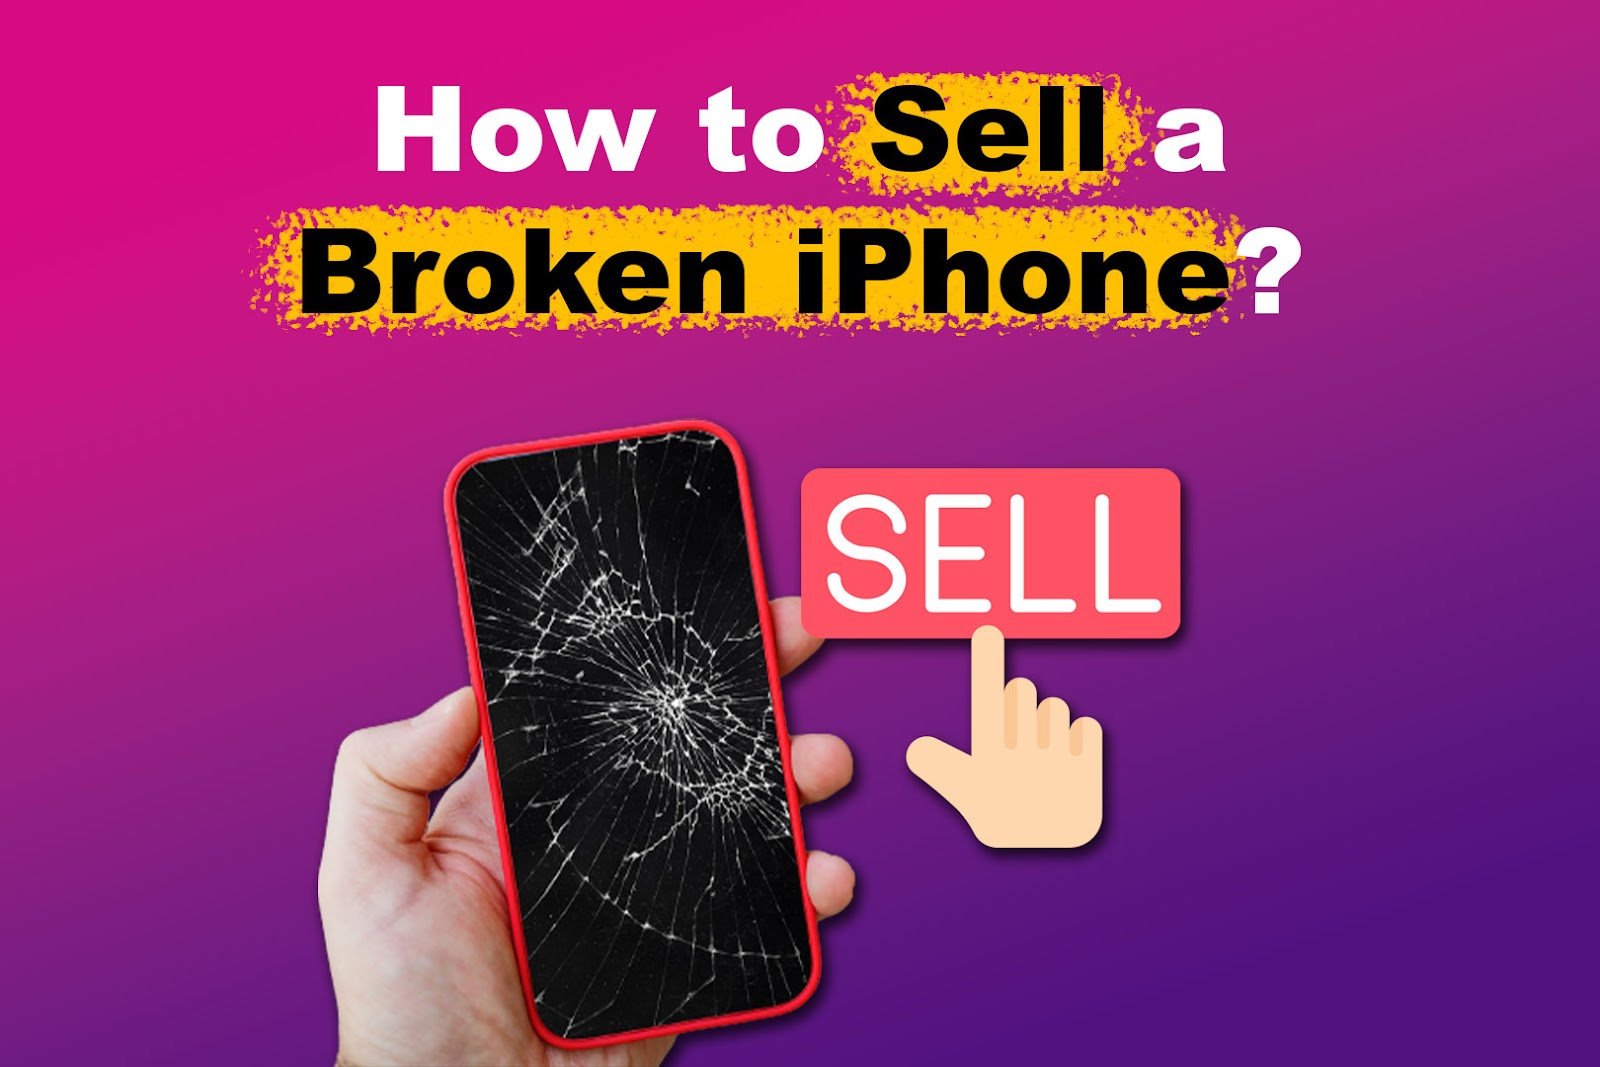 6 Best Websites to Sell a Broken iPhone [Super Easy]